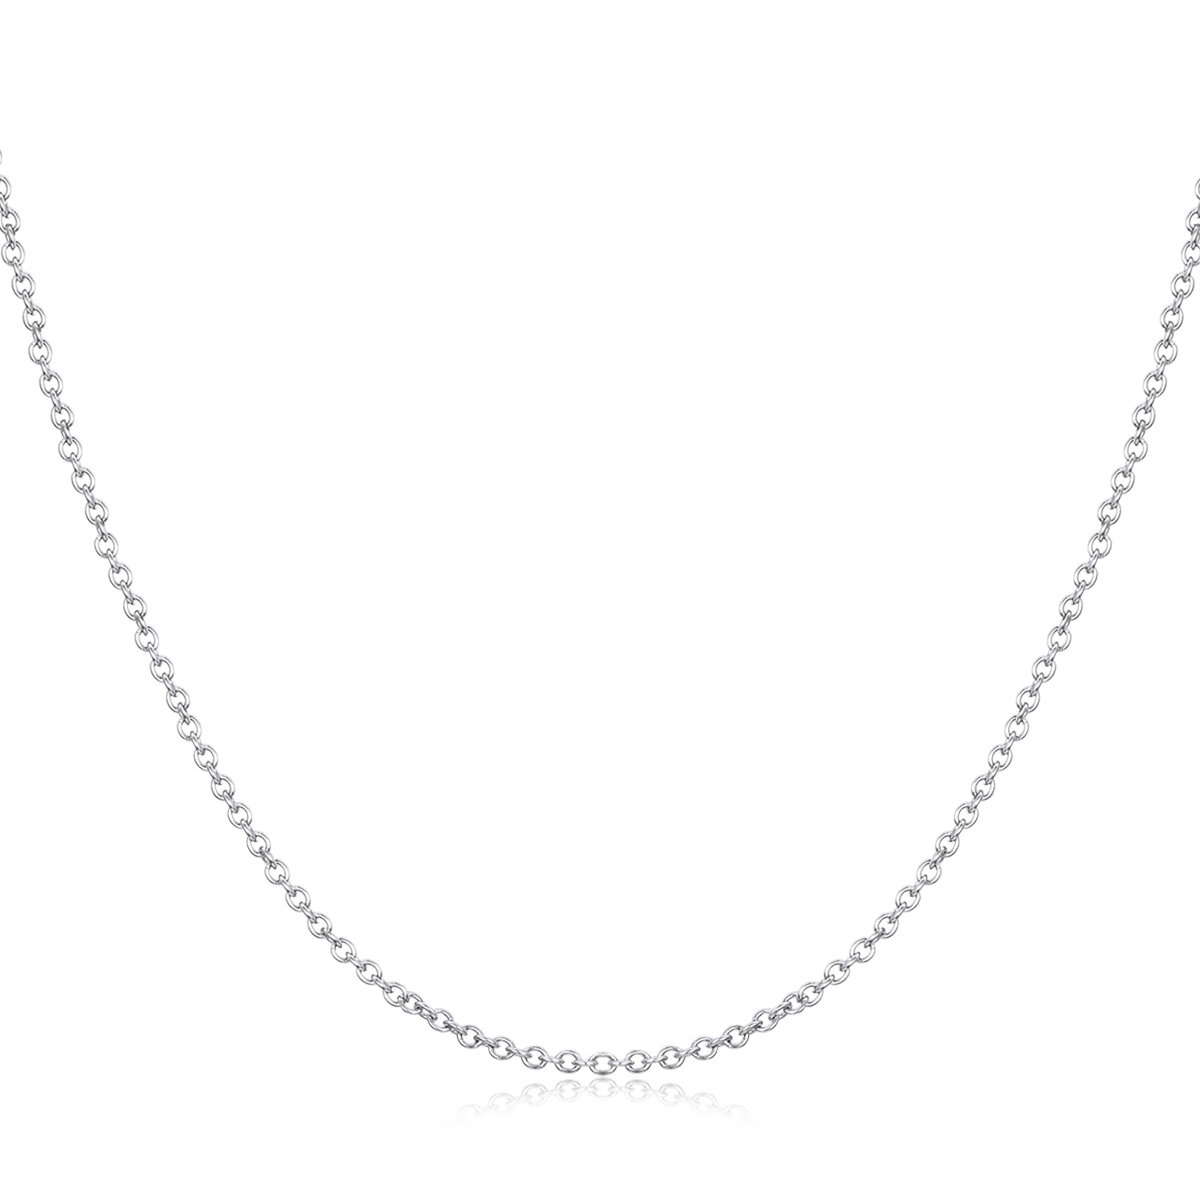 GemKing BSN228 DIY Basic chain S925 Sterling Silver Necklace